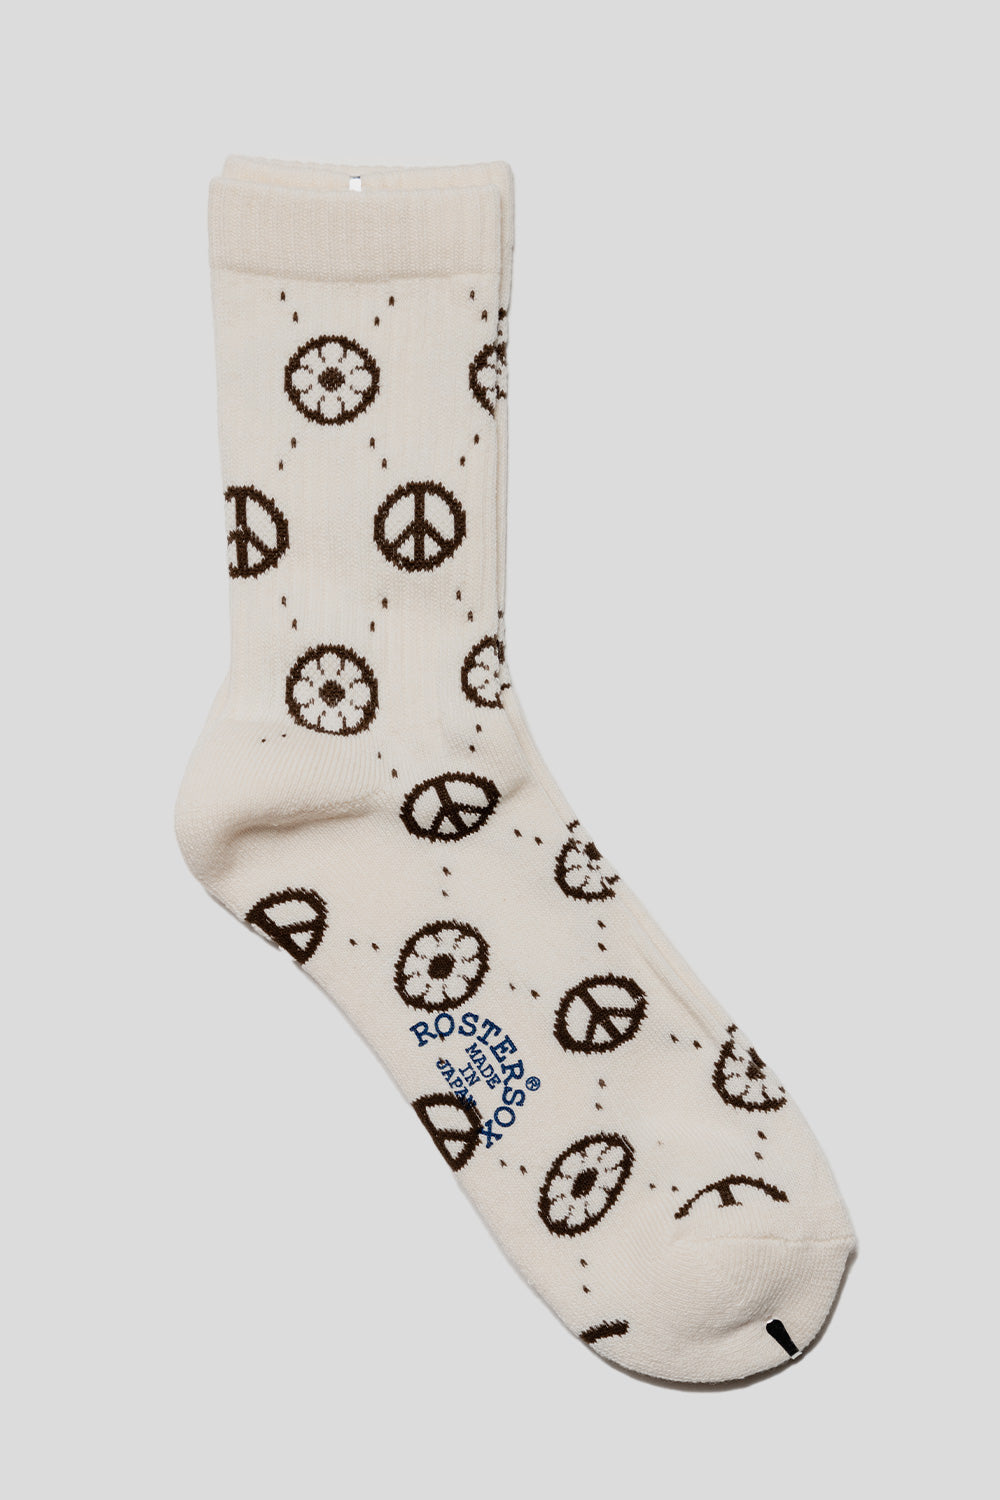 Rostersox HP Socks in White | Wallace Mercantile Shop